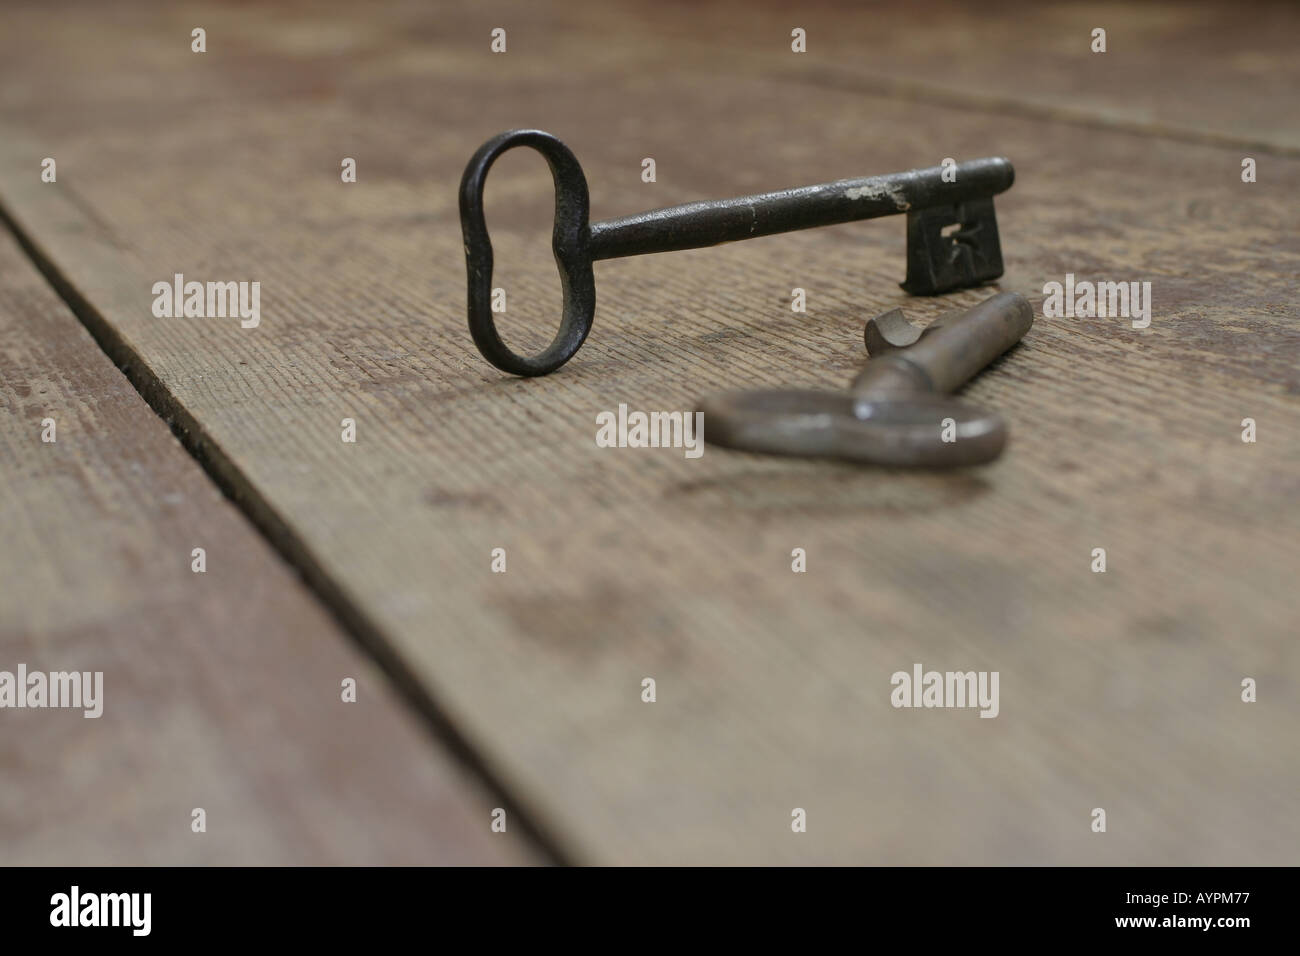 Two antique keys placed on a wooden table Stock Photo